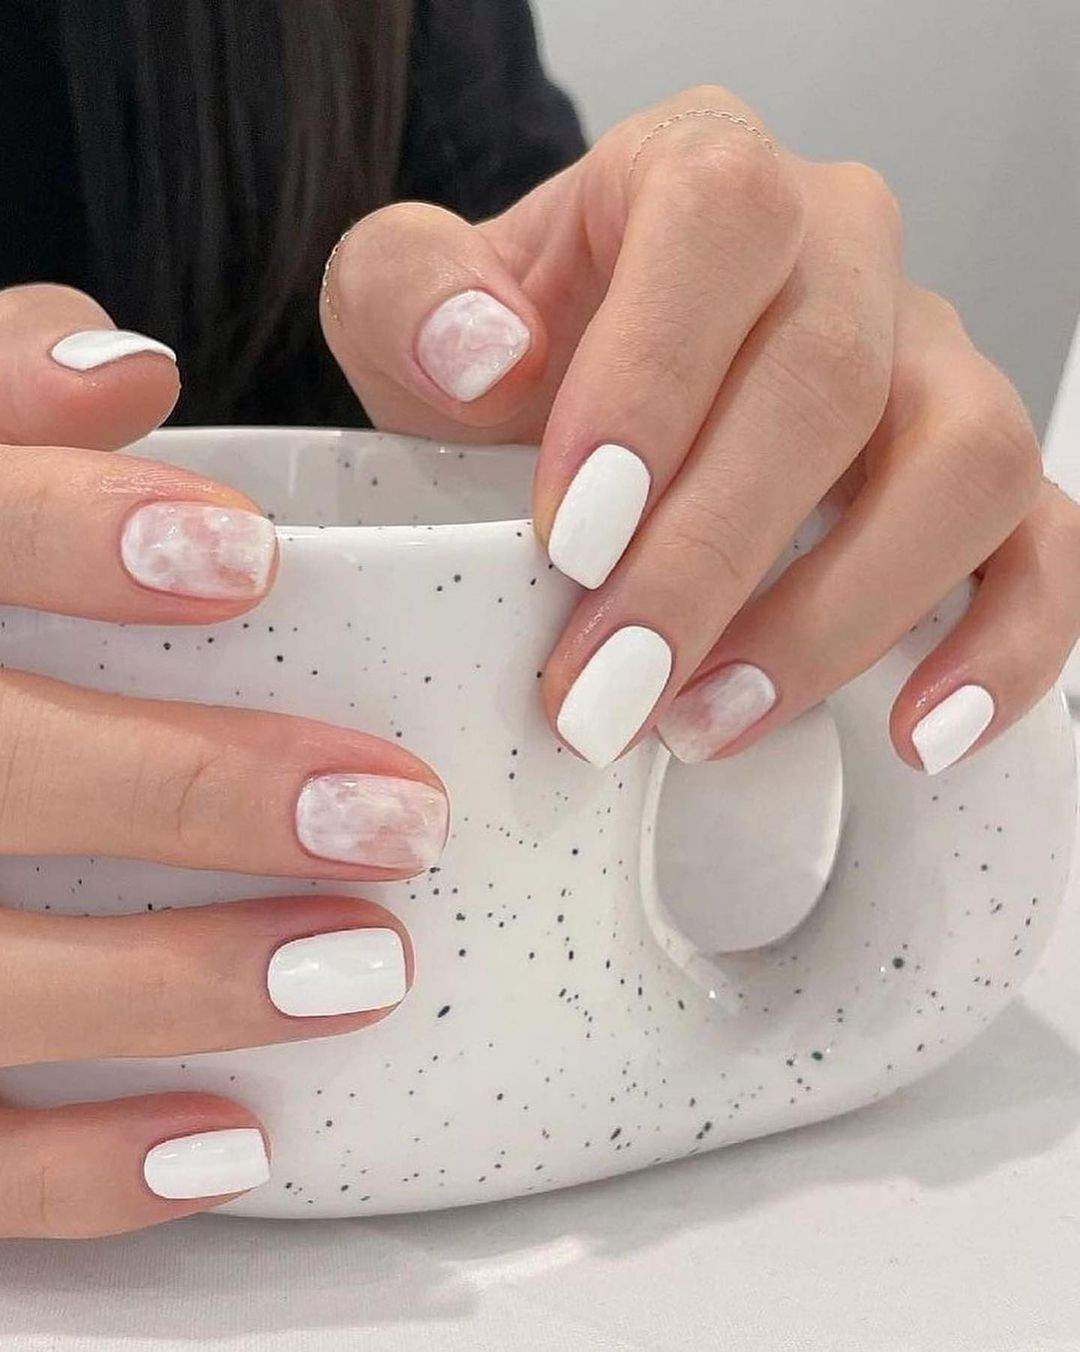 The 100+ Best Nail Designs Trends And Ideas In 2021 images 53